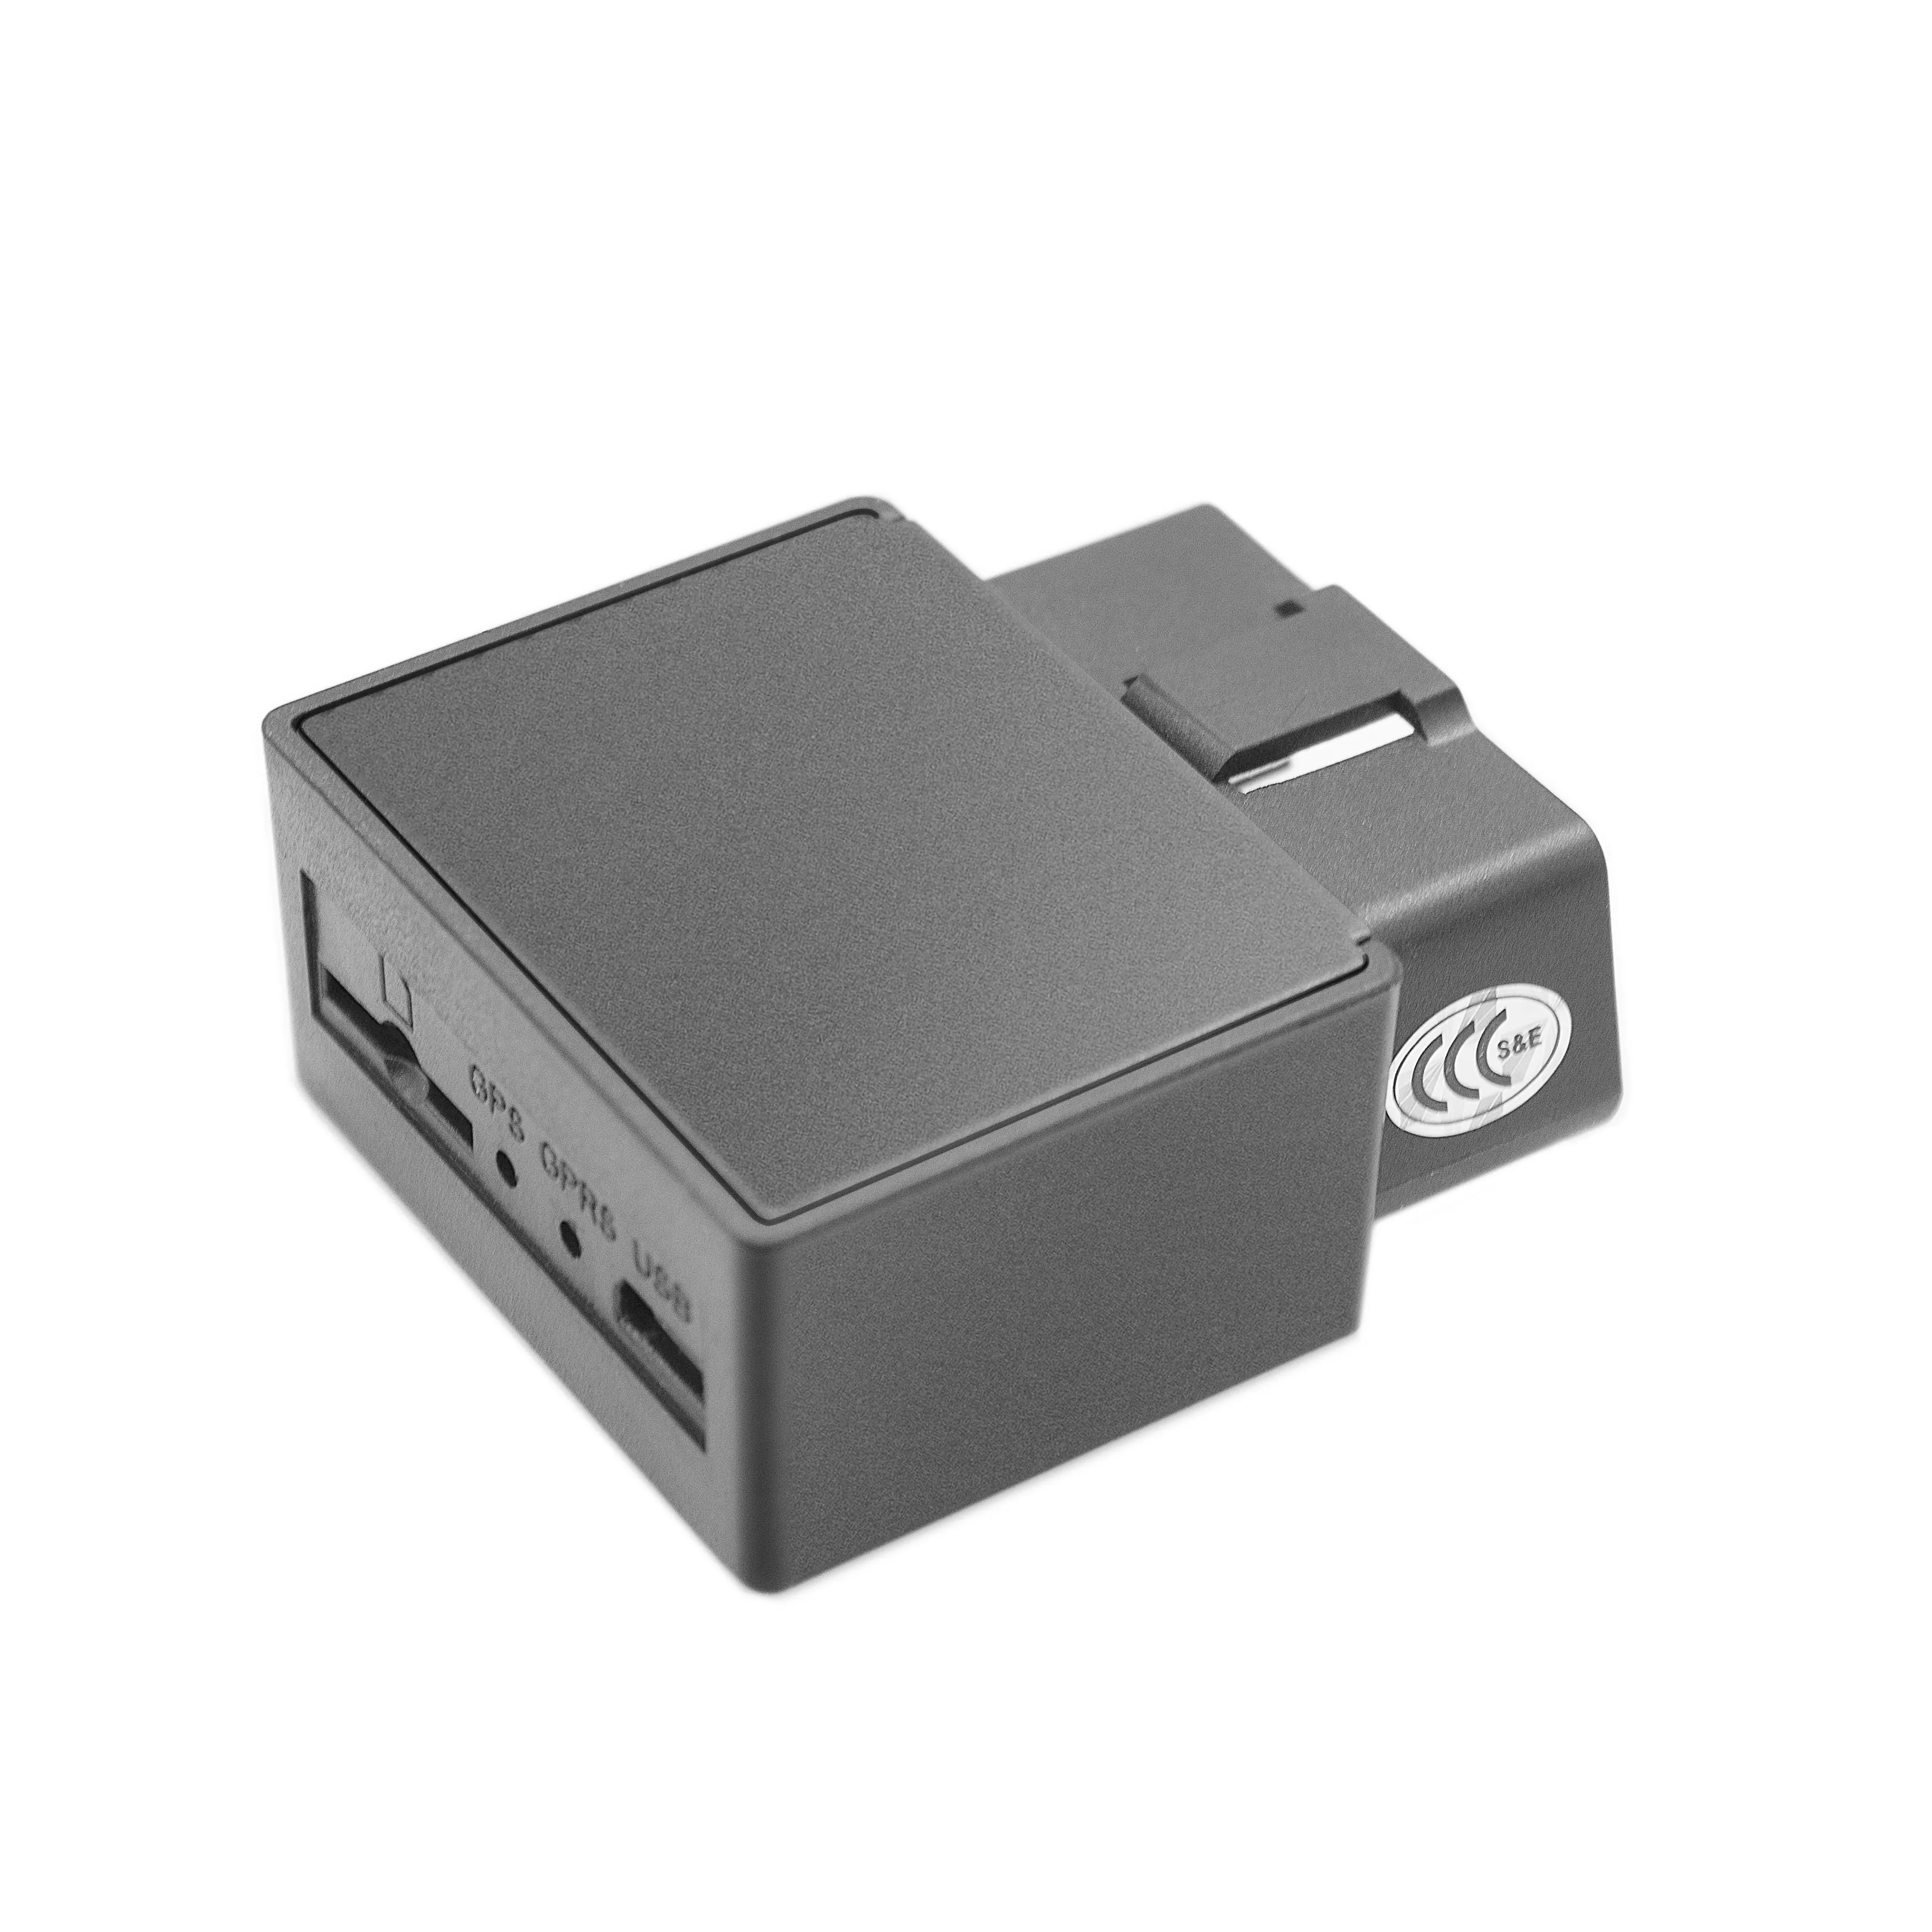 Obd Gps Tracker Met Real-Time Tracking Functie 4G Obd Gps Tracking Device En Software Truck Bus Voertuig Tracking Locator